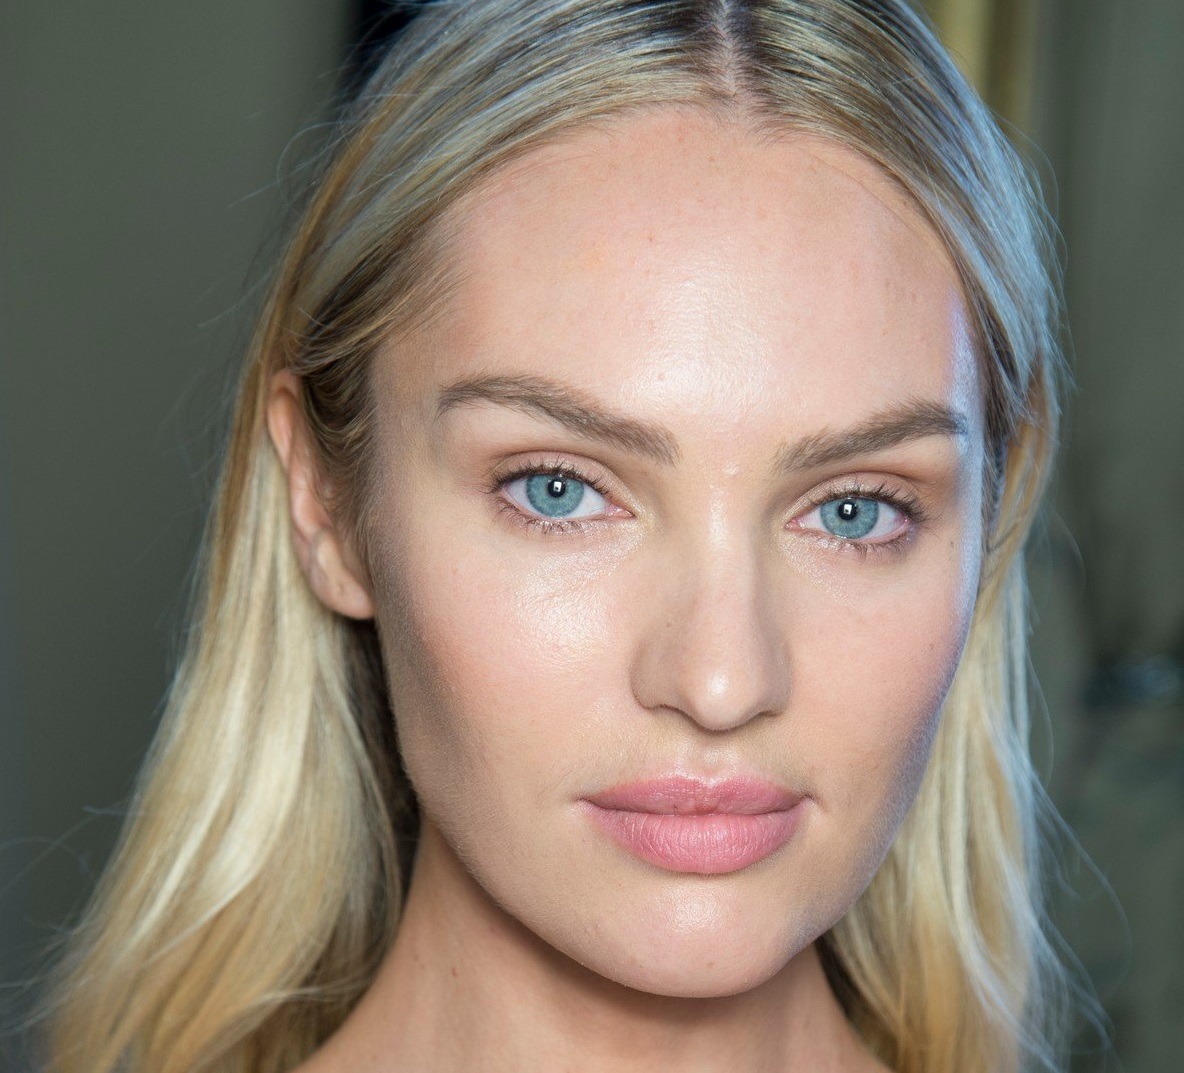 FOR EDITORIAL USE ONLY. Bottega Veneta Backstage Milan Ready to Wear. Spring/Summer 2018. South African model Candice Swanepoel. ADDITIONAL IMAGES AVAILABLE ON REQUEST., Image: 355000064, License: Rights-managed, Restrictions: , Model Release: no, Credit line: Profimedia, TEMP Camerapress